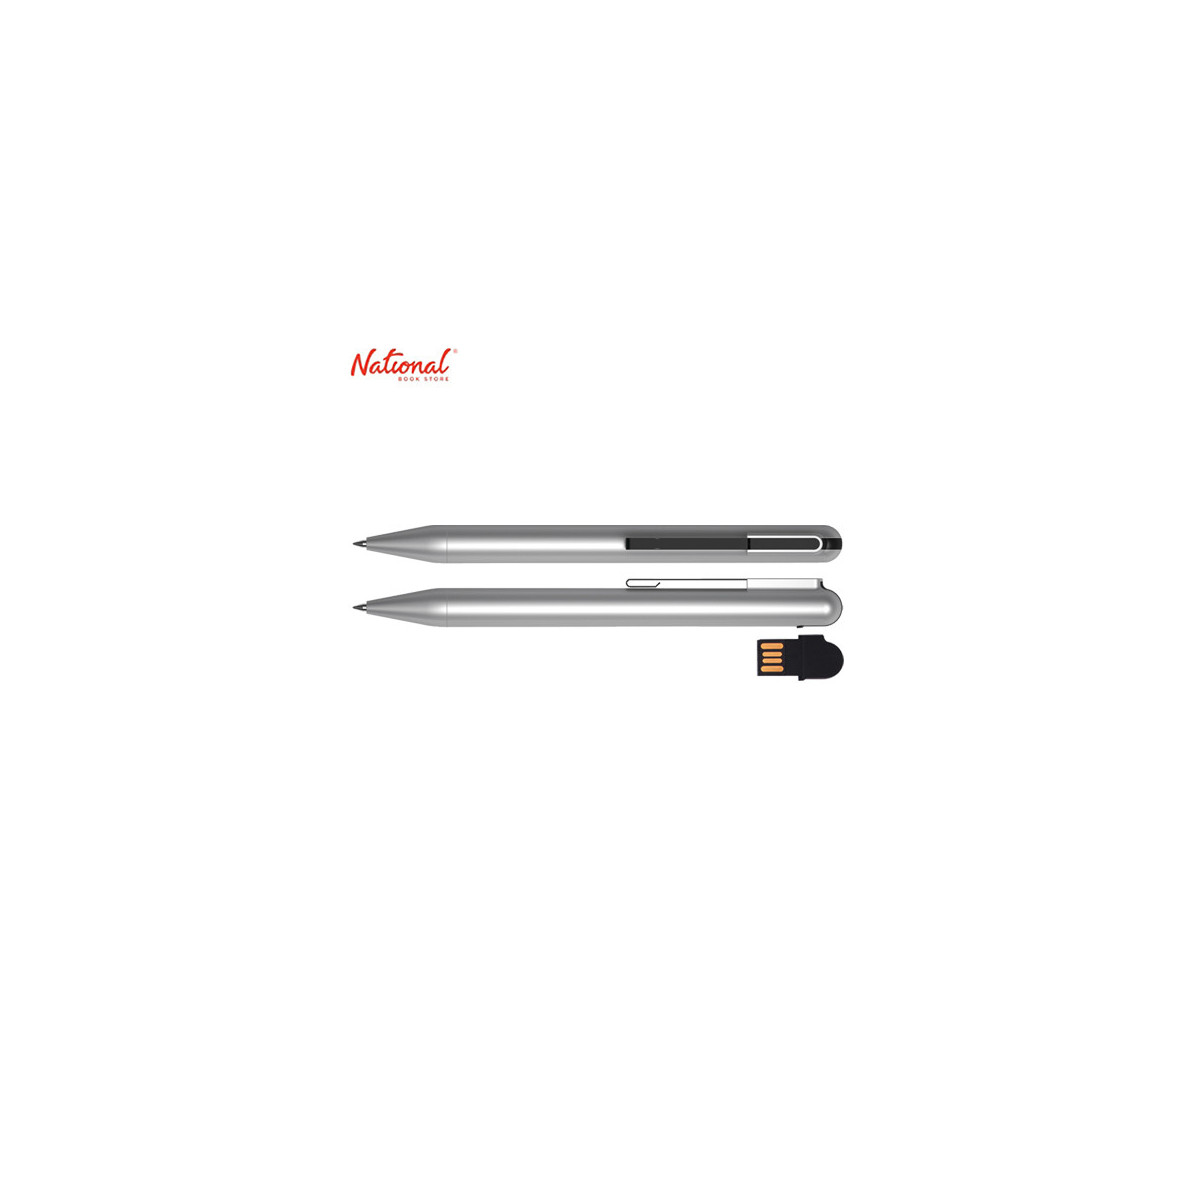 Prostar 2-in-1 Plastic Twist Action Fine Ballpoint Pen with 16GB USB PS-22